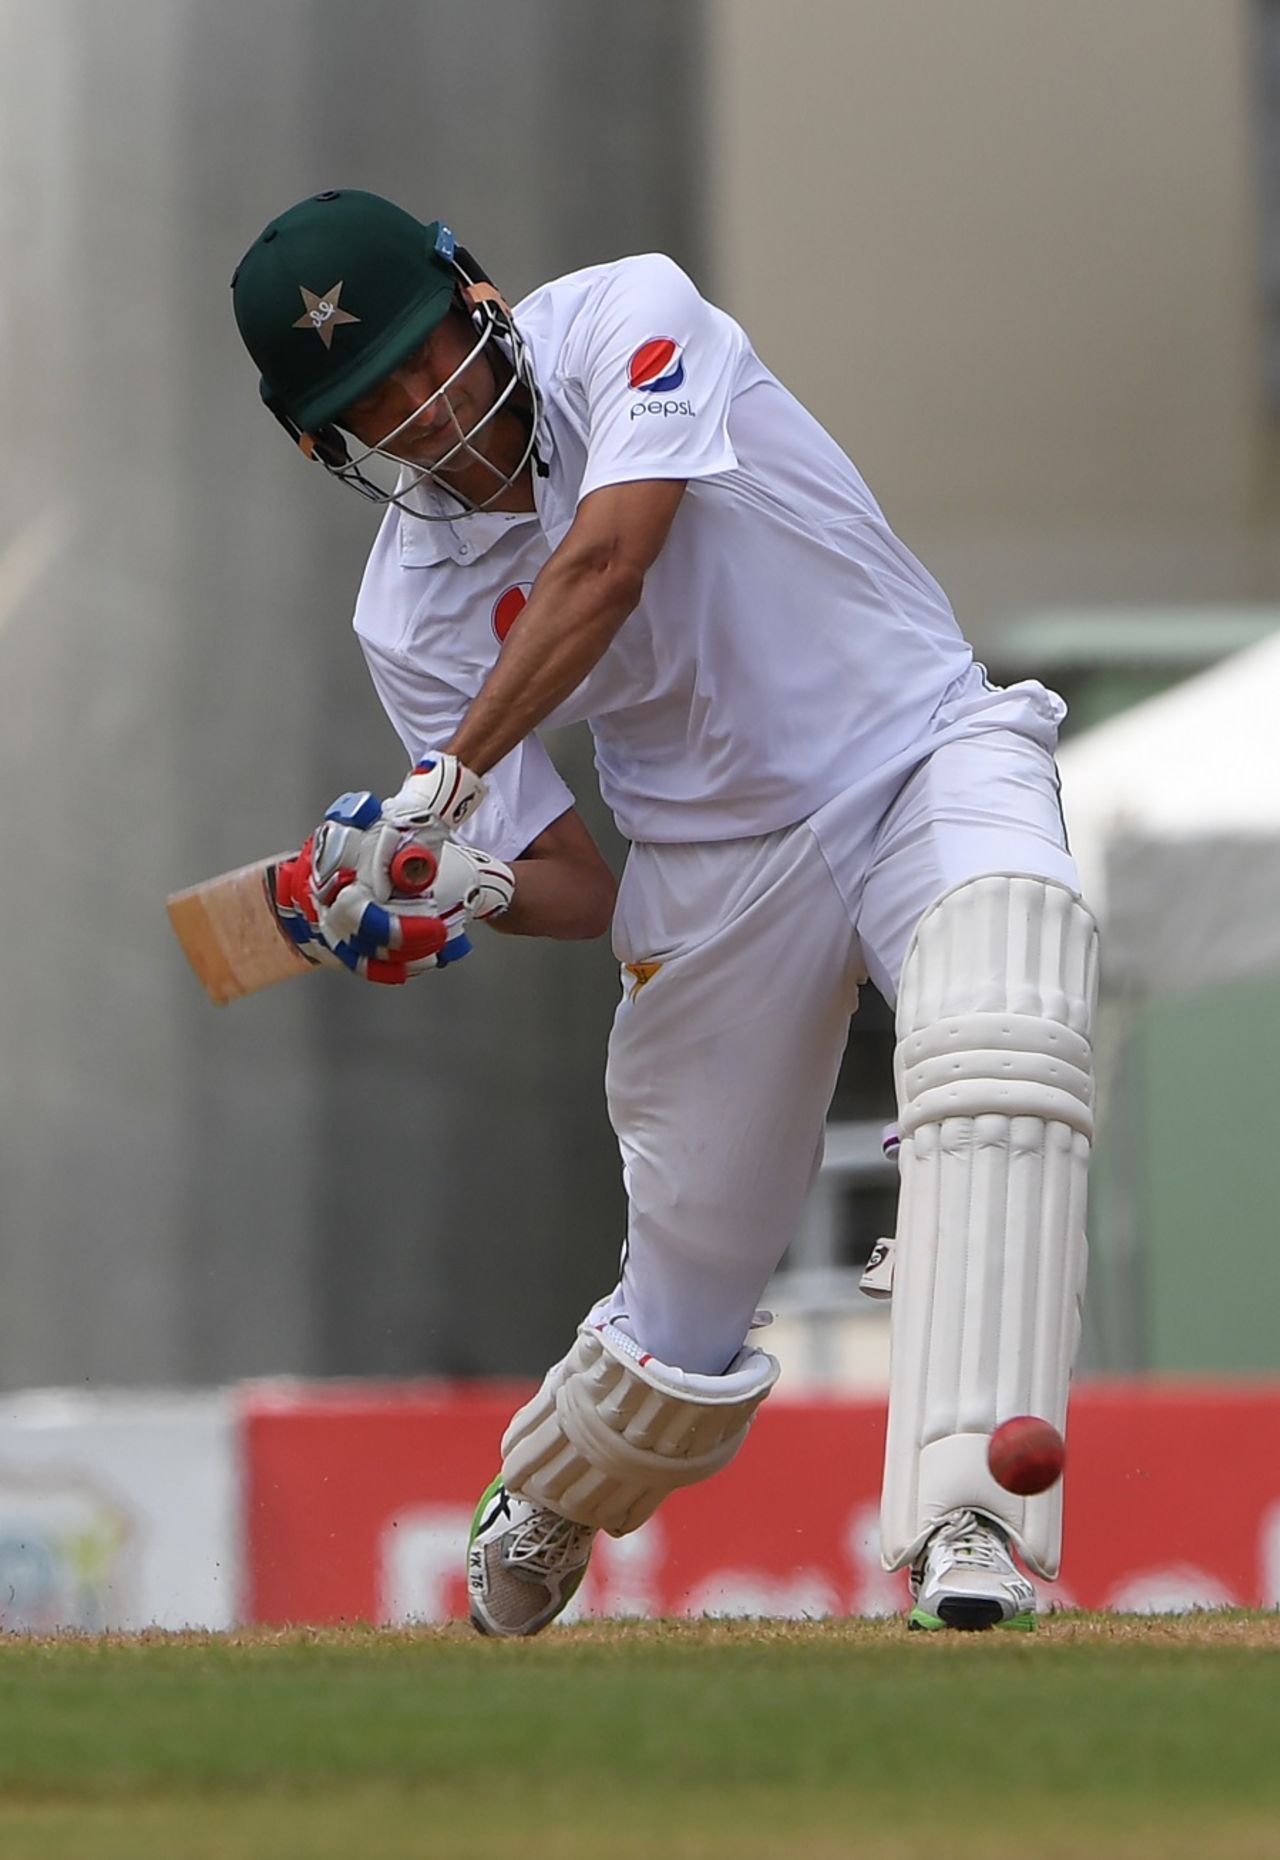 Younis Khan shapes up to play through the leg side, West Indies v Pakistan, 3rd Test, Roseau, 2nd day, May 11, 2017